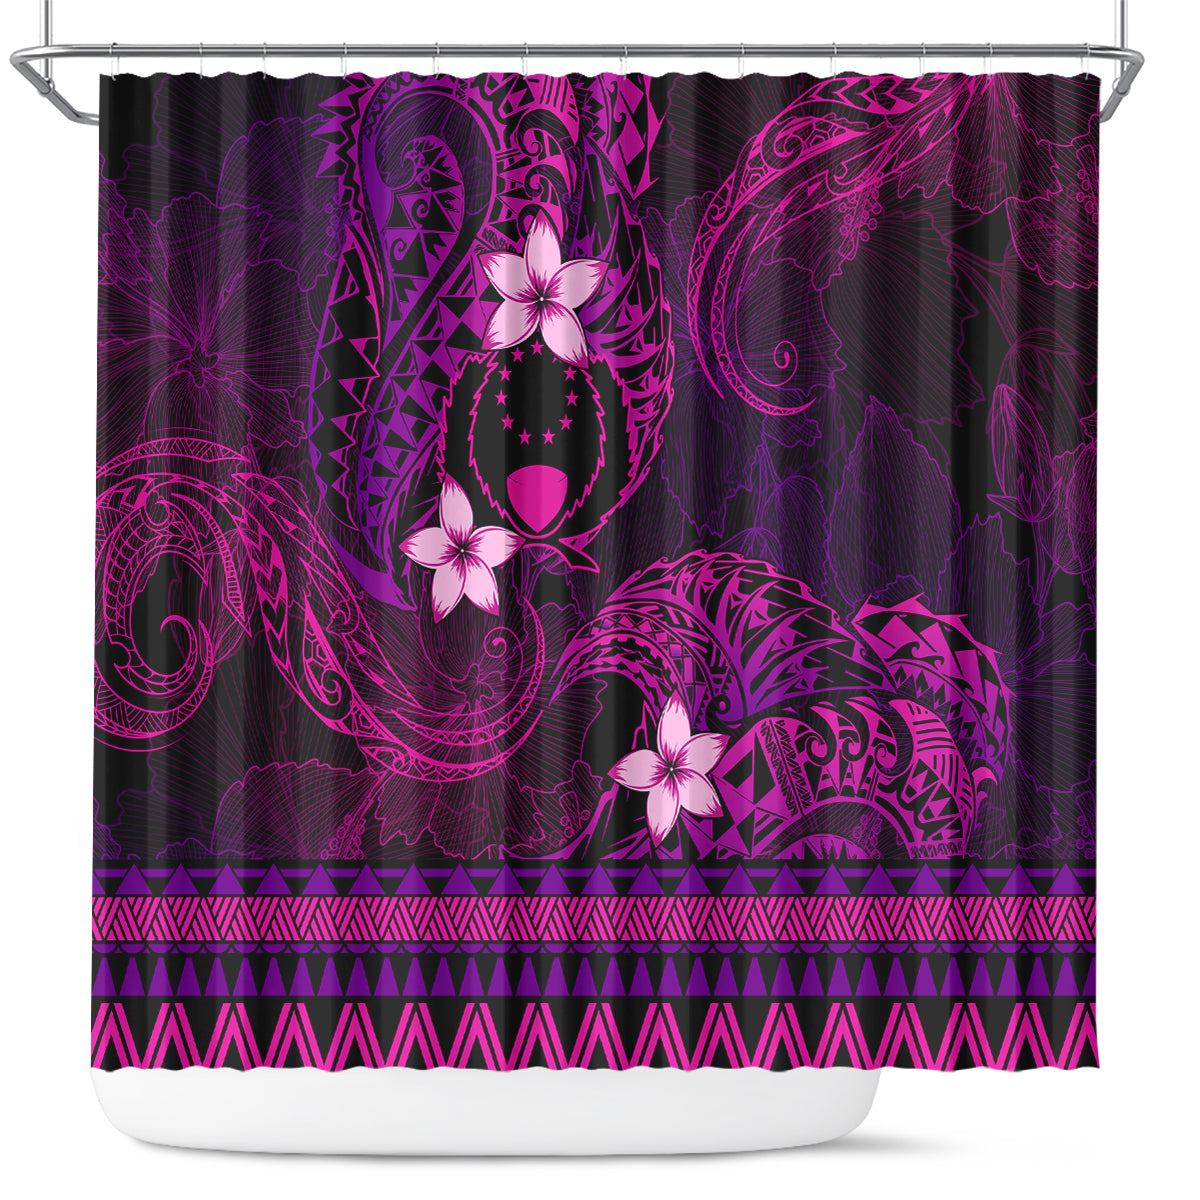 FSM Pohnpei State Shower Curtain Tribal Pattern Pink Version LT01 Pink - Polynesian Pride